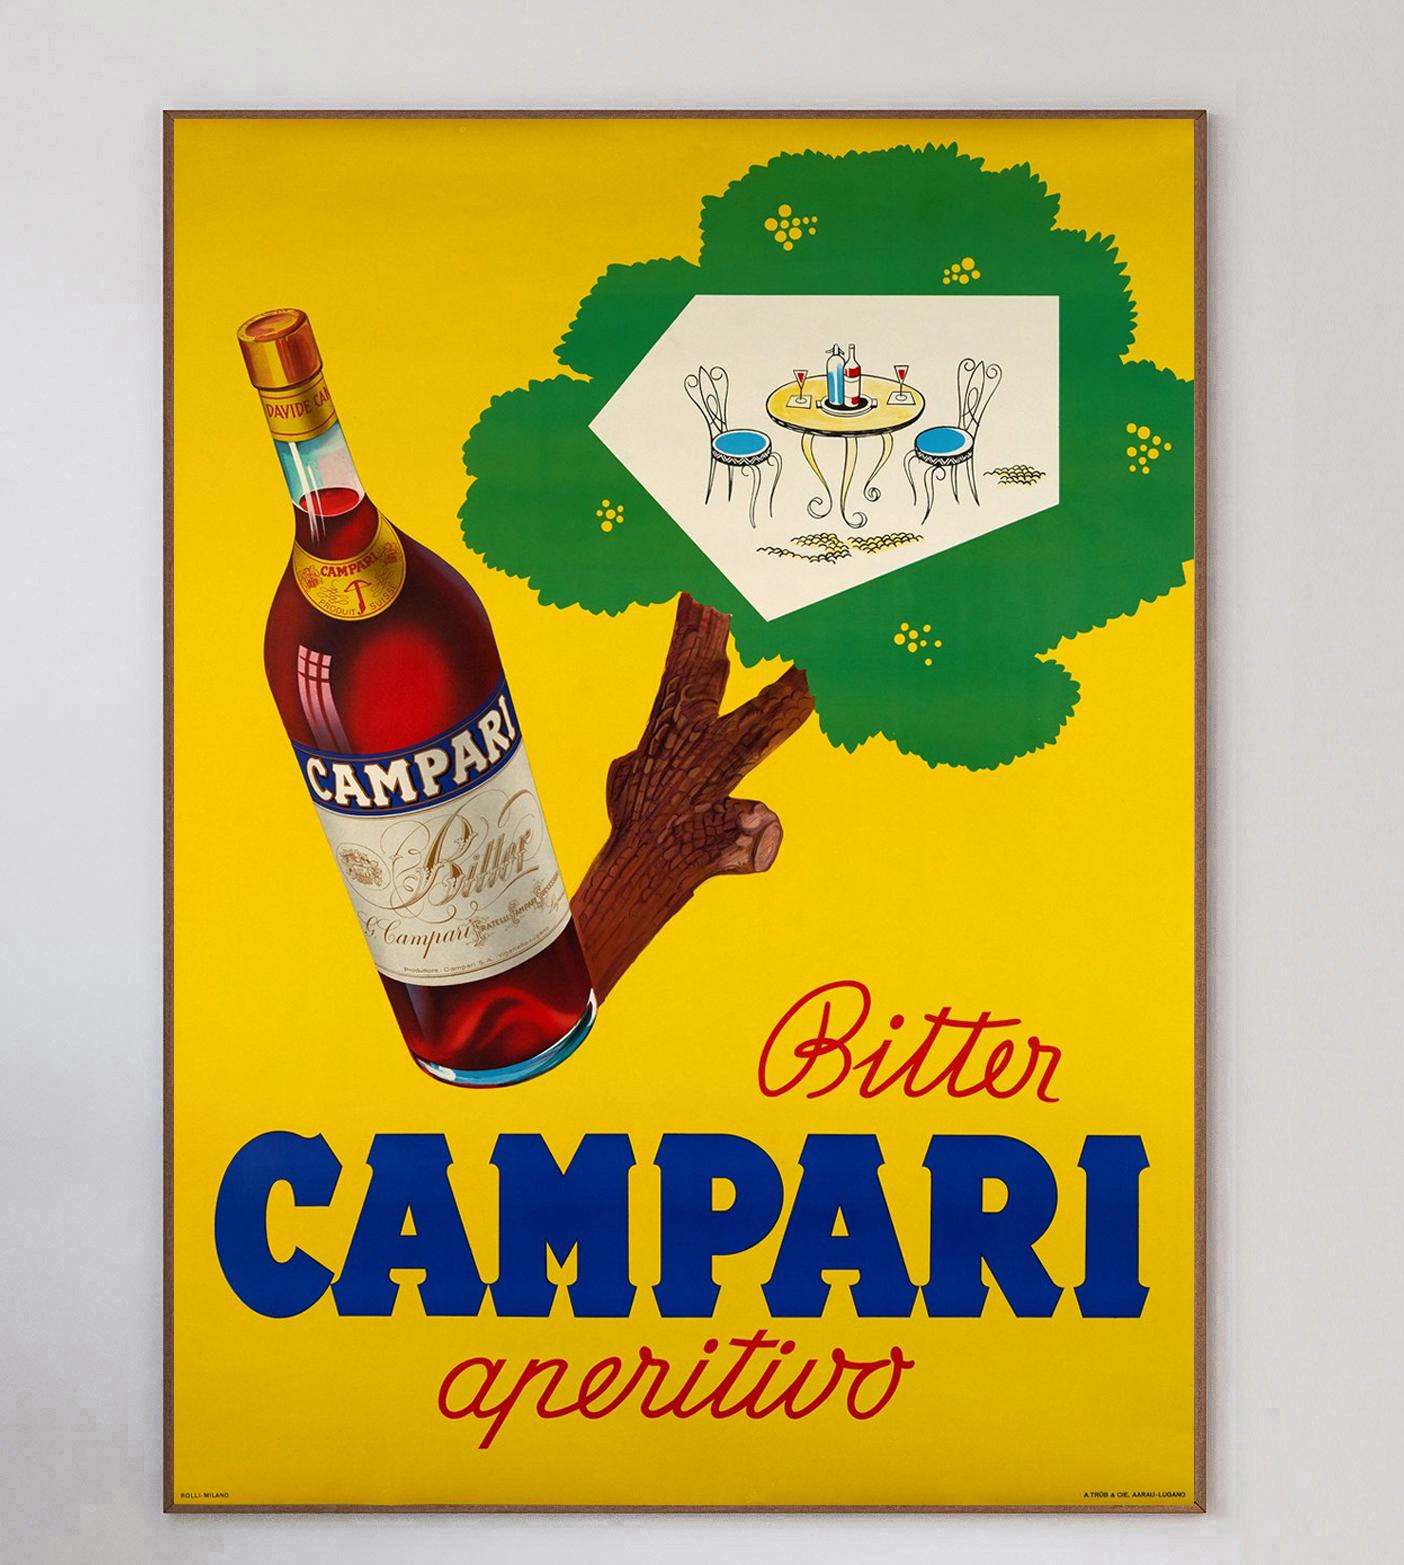 Campari was formed in 1860 by Gaspare Campari and the aperitif is as popular today as ever. His son, Davide Campari transformed the company in 1926 into what it is widely known for today. This gorgeous lithographic poster was created in 1955 with